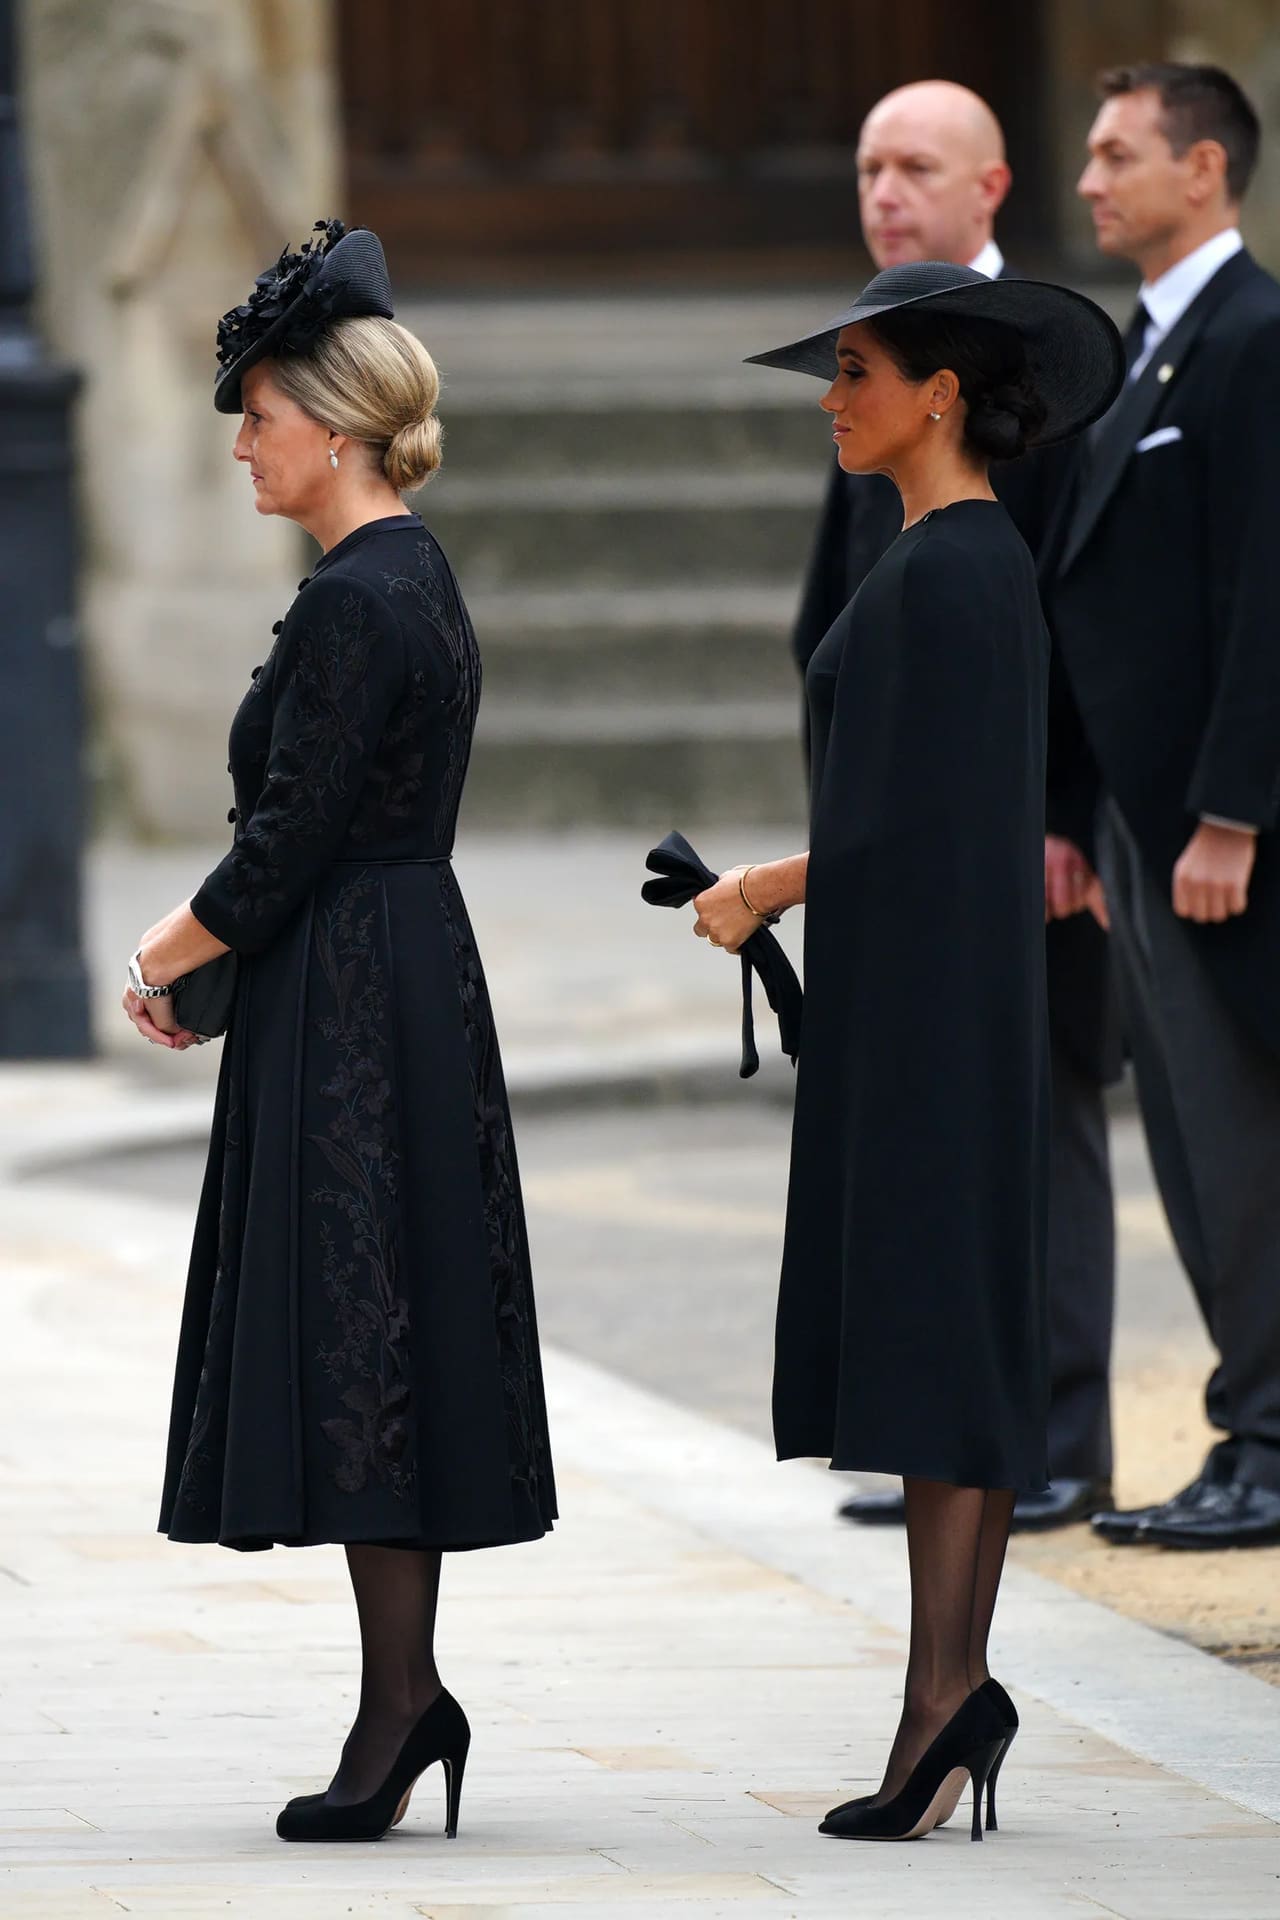 How The Princess Of Wales And The Duchess Of Sussex’s Fashion Honored ...